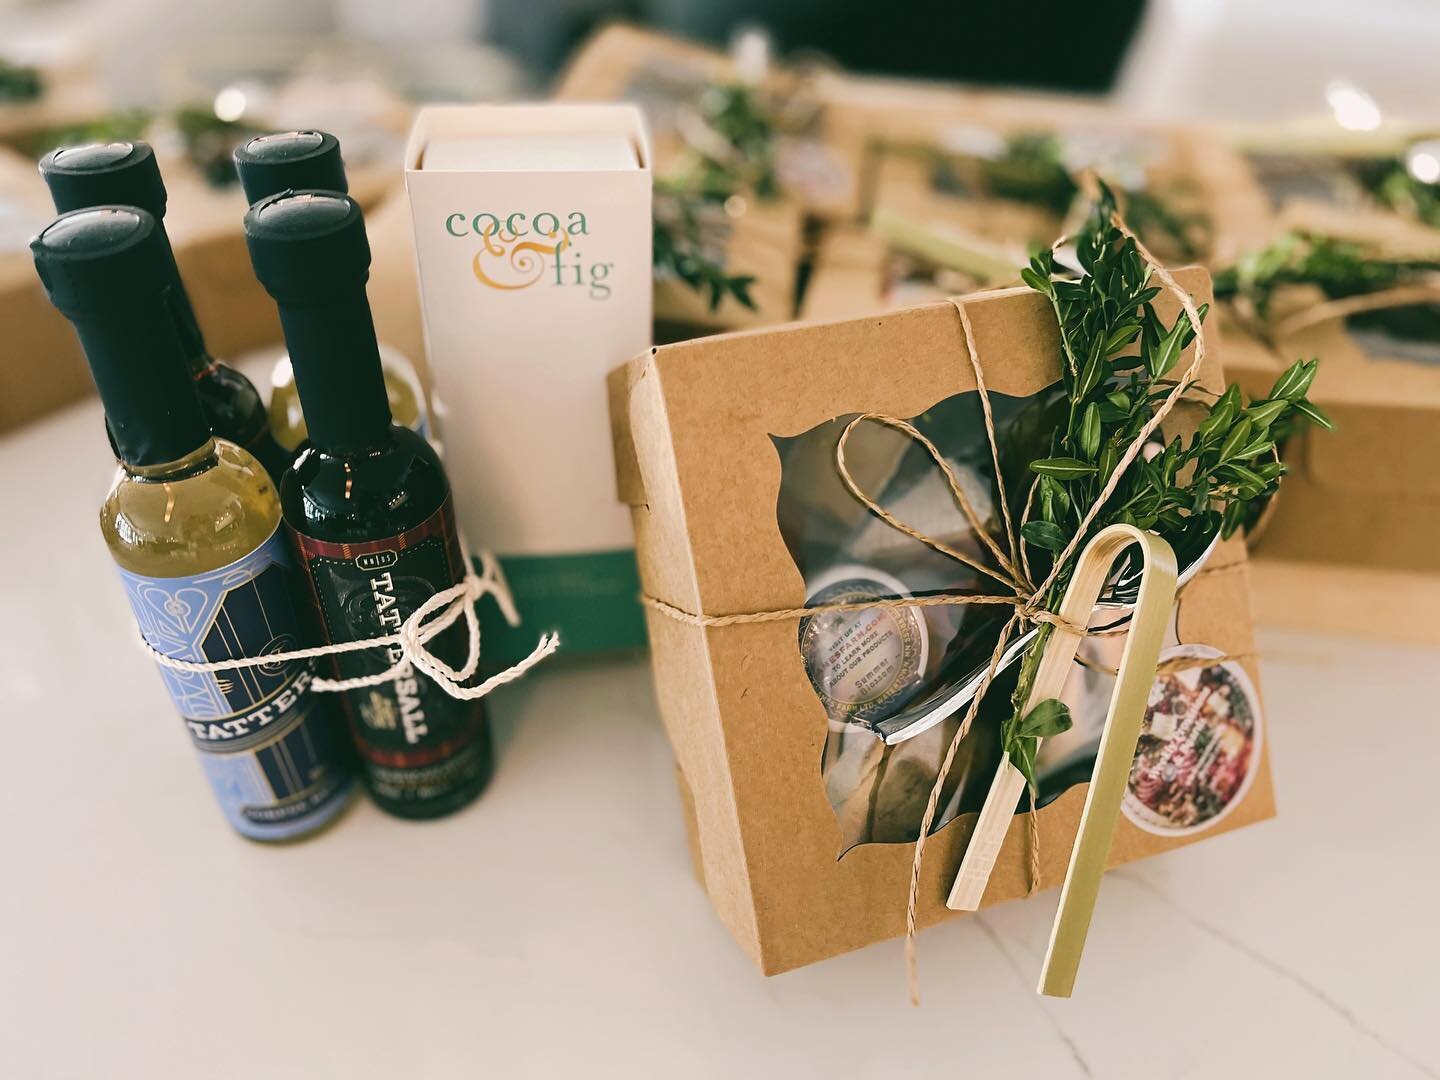 They&rsquo;re still celebrating at The Lakes Residences ✨ &hellip;check out these swag bags for an in-home cocktail hour for their residents 🍸😍! 

Thank you to @cocoaandfig @tattersalldistilling @weeklyprovisions for providing the delicious treats!